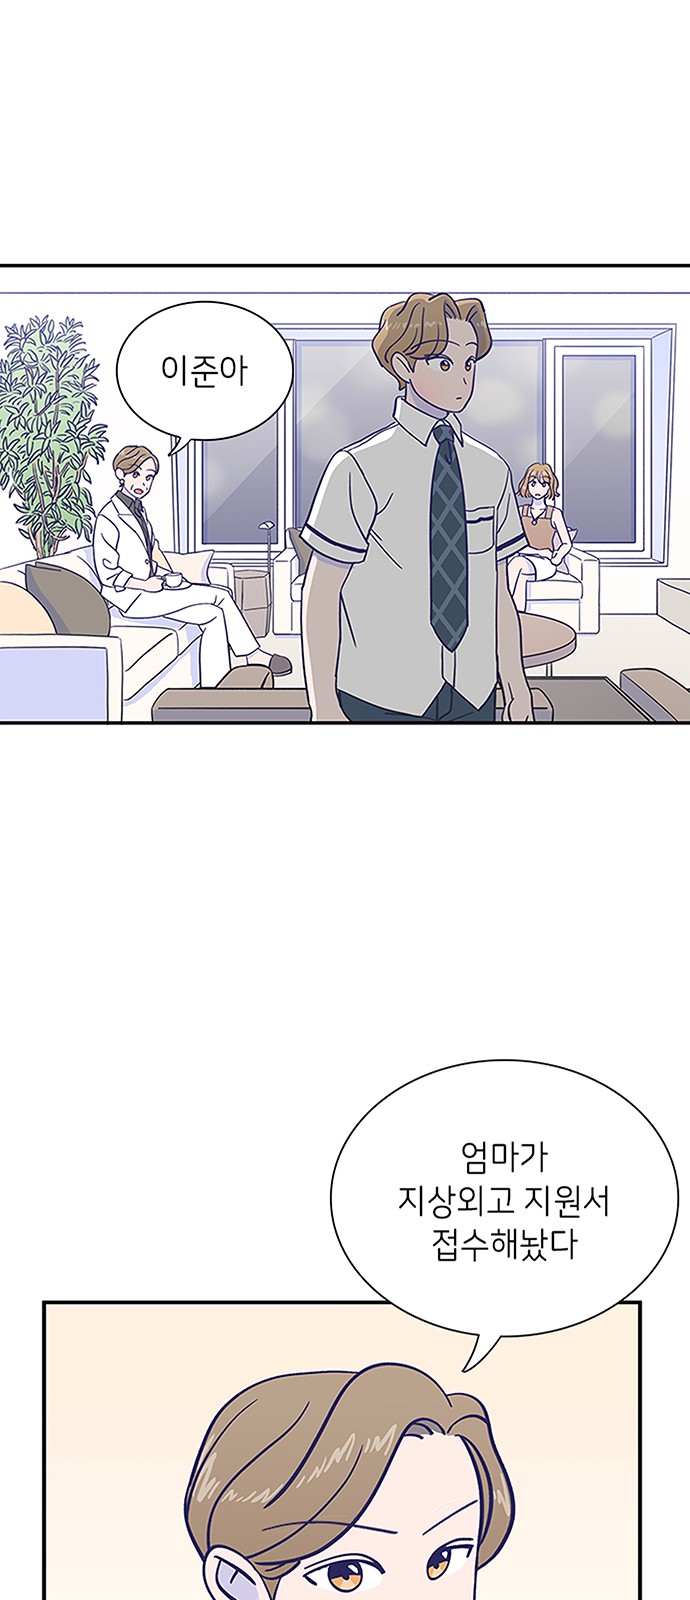 Dance School Boy - Chapter 18 - Page 1